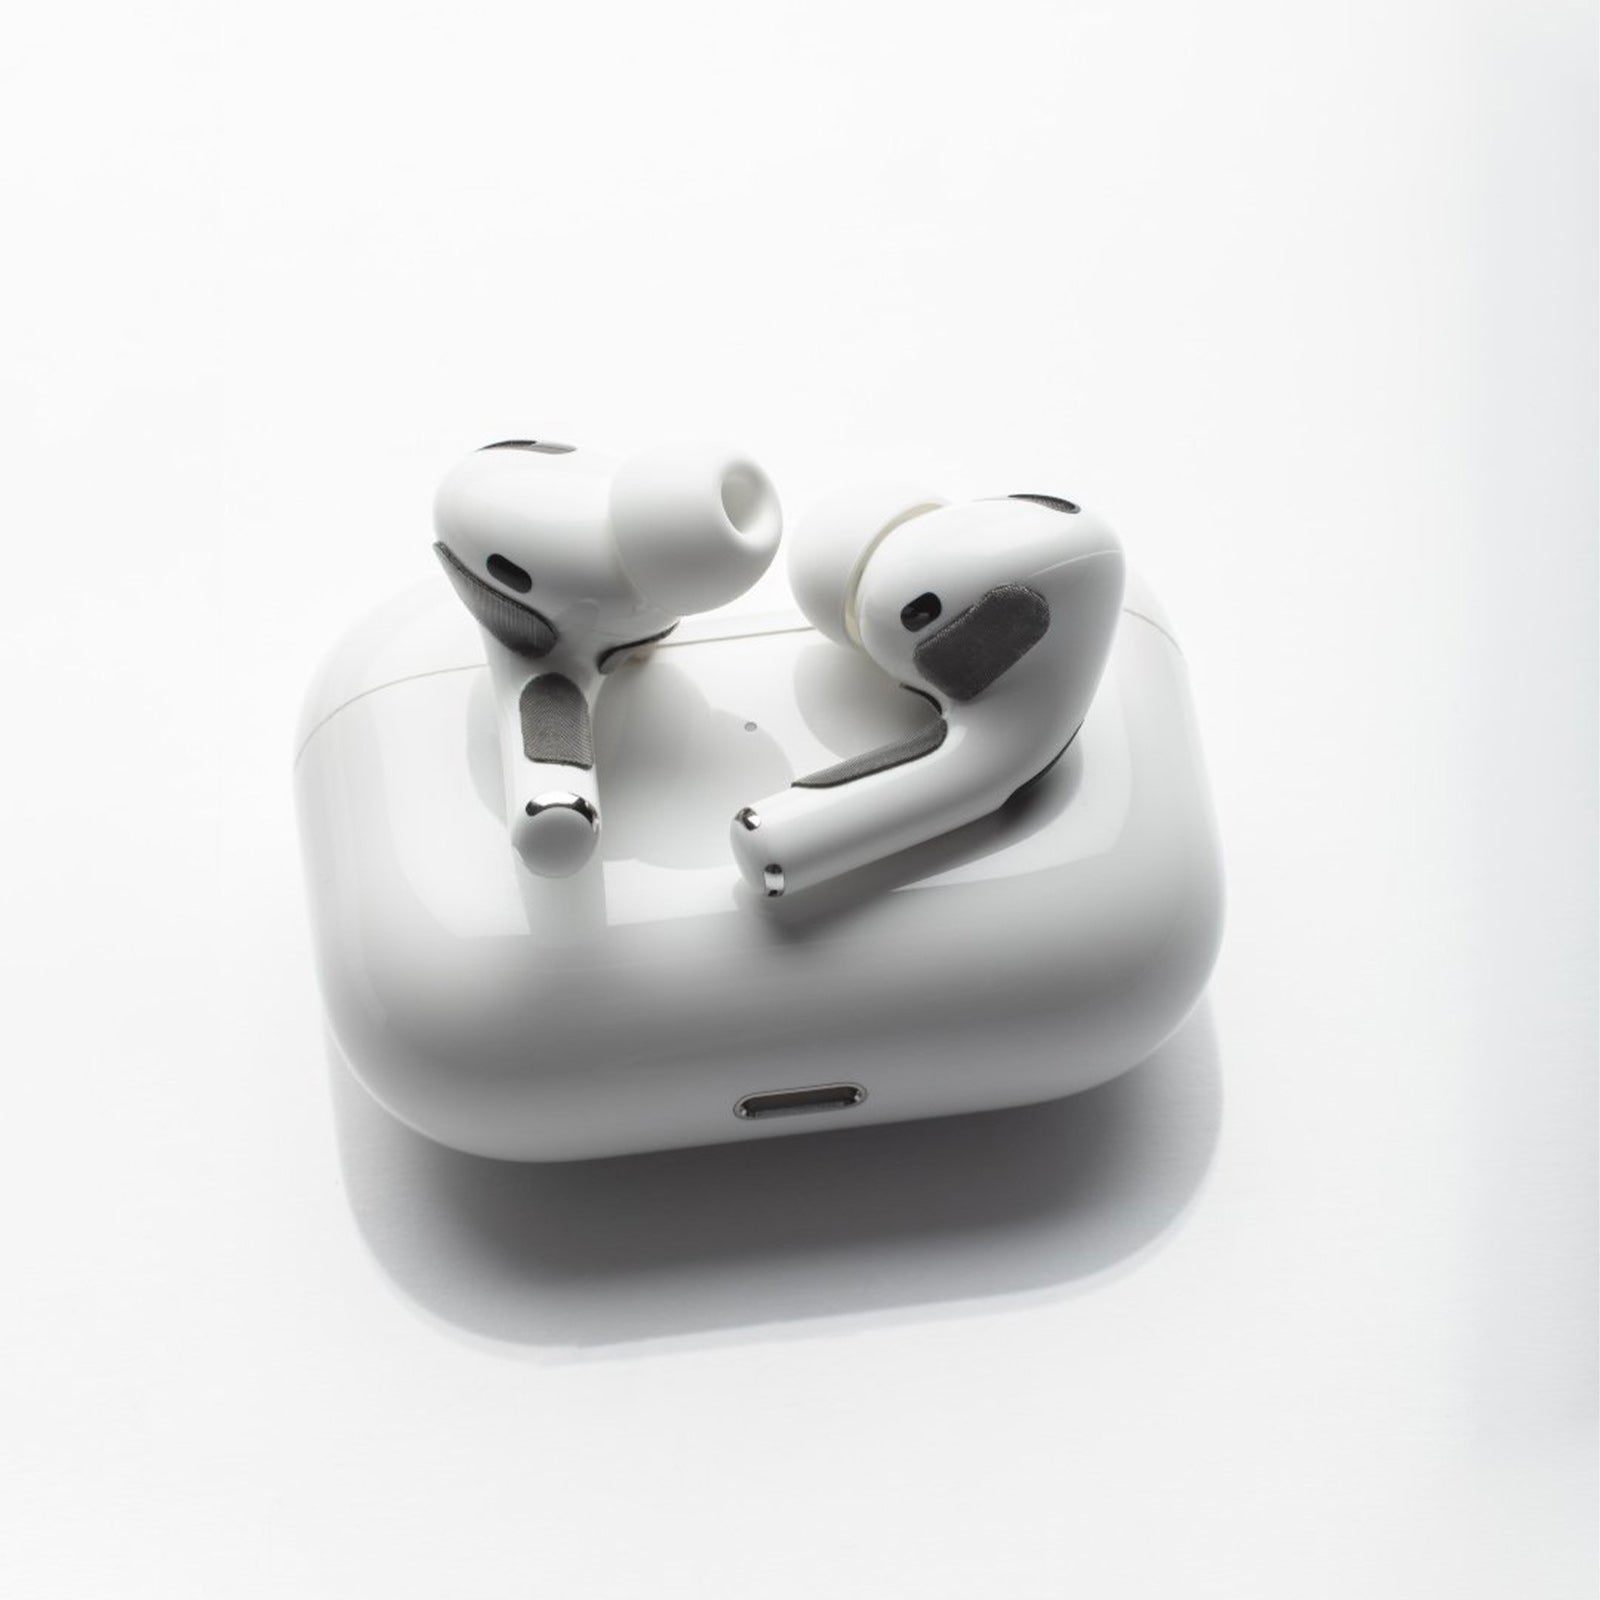 Constant Danger - Cool Apple Airpods Pro Case Cover